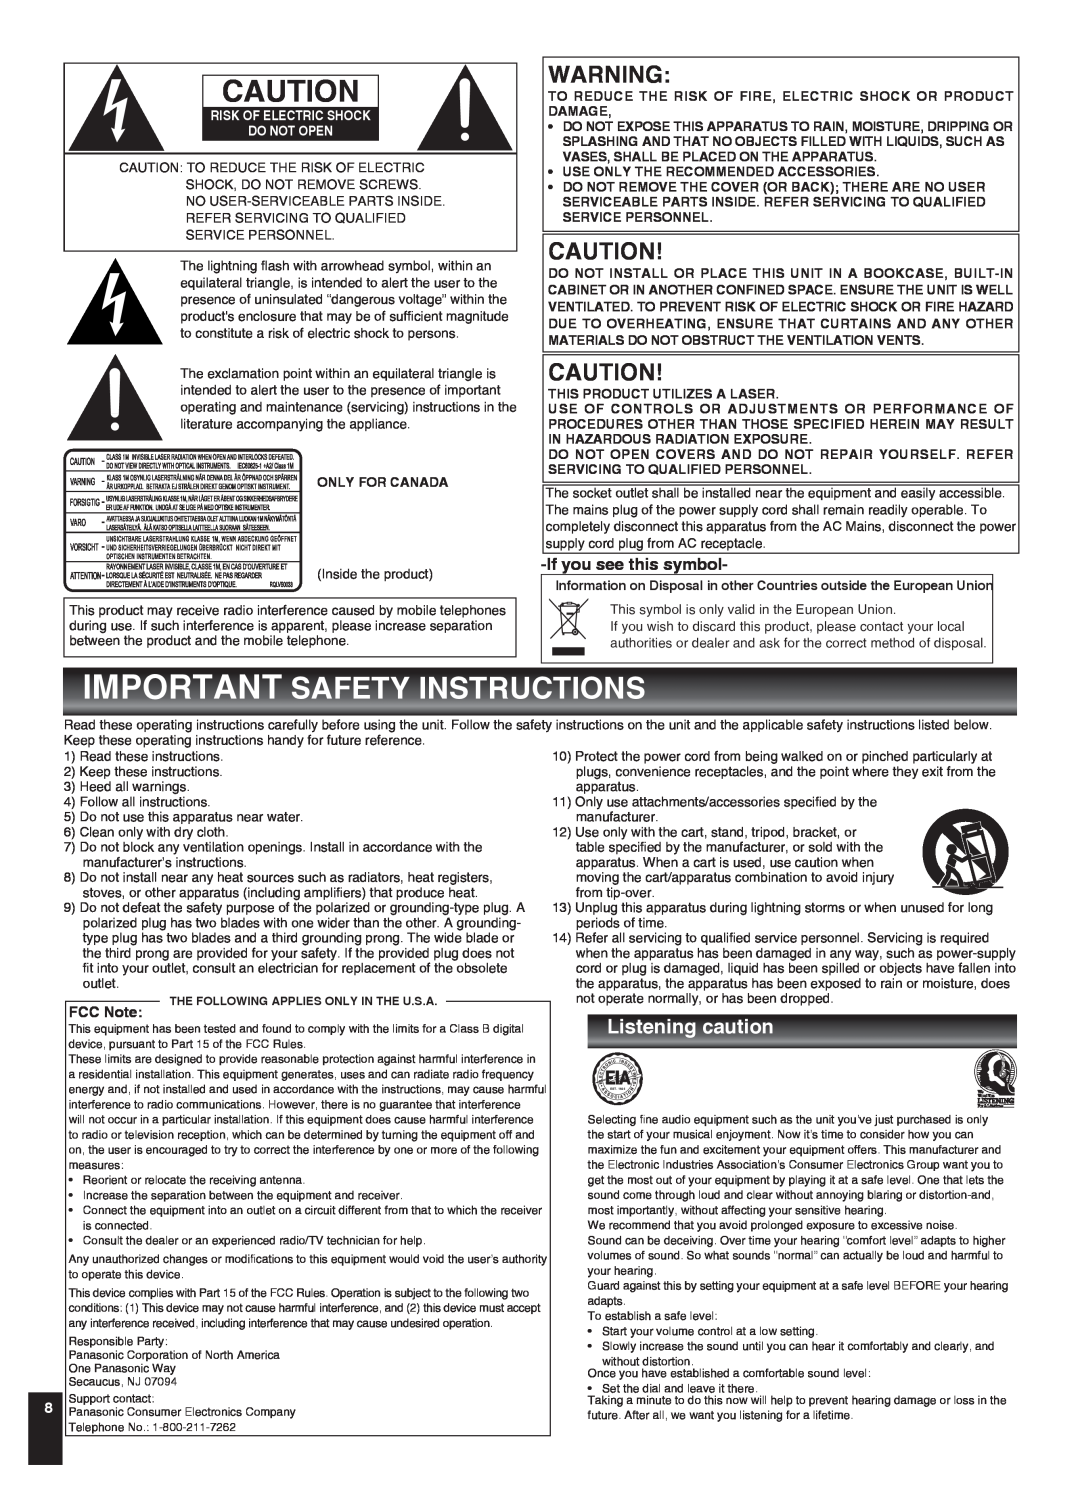 Panasonic SC-EN37 manual Listening caution, Ifyou see this symbol, FCC Note, Risk Of Electric Shock Do Not Open 